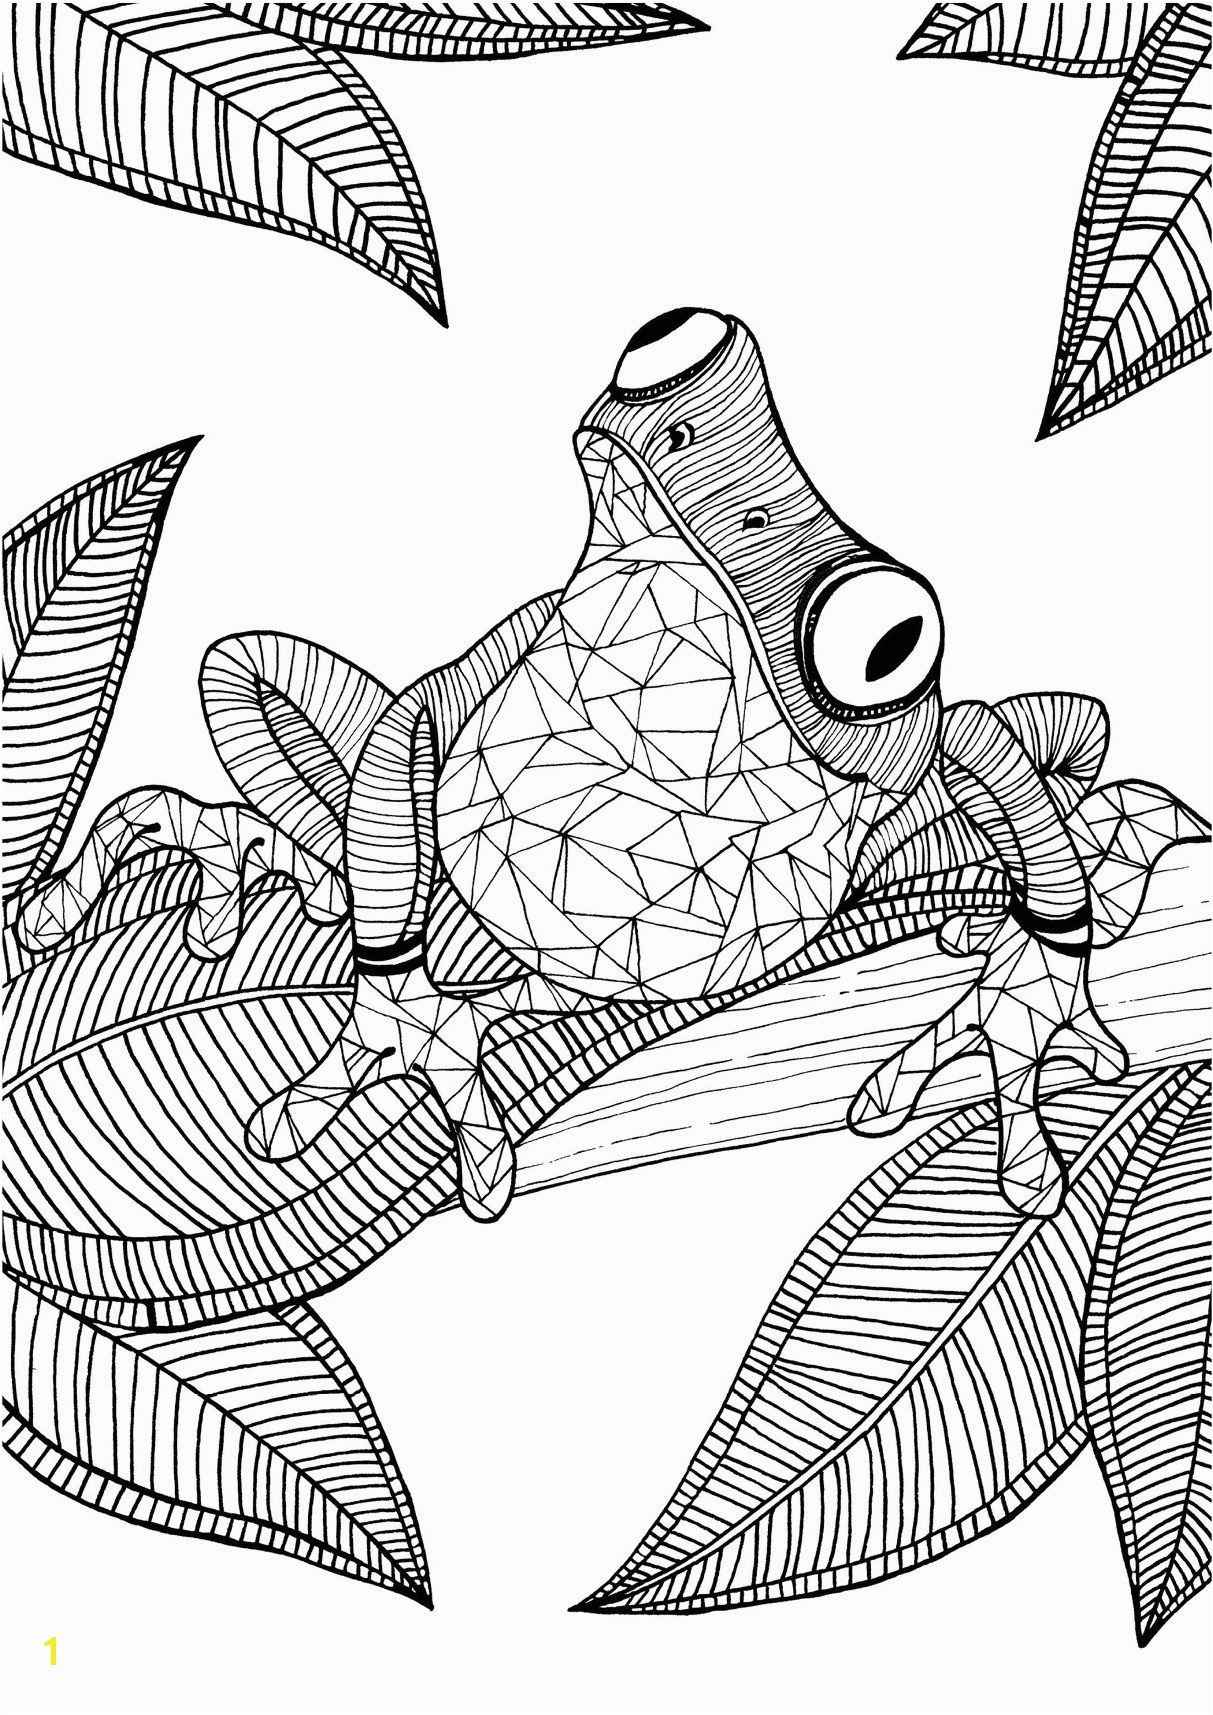 Crazy Frog Coloring Pages Frog Adult Colouring Page Colouring In Sheets Art & Craft